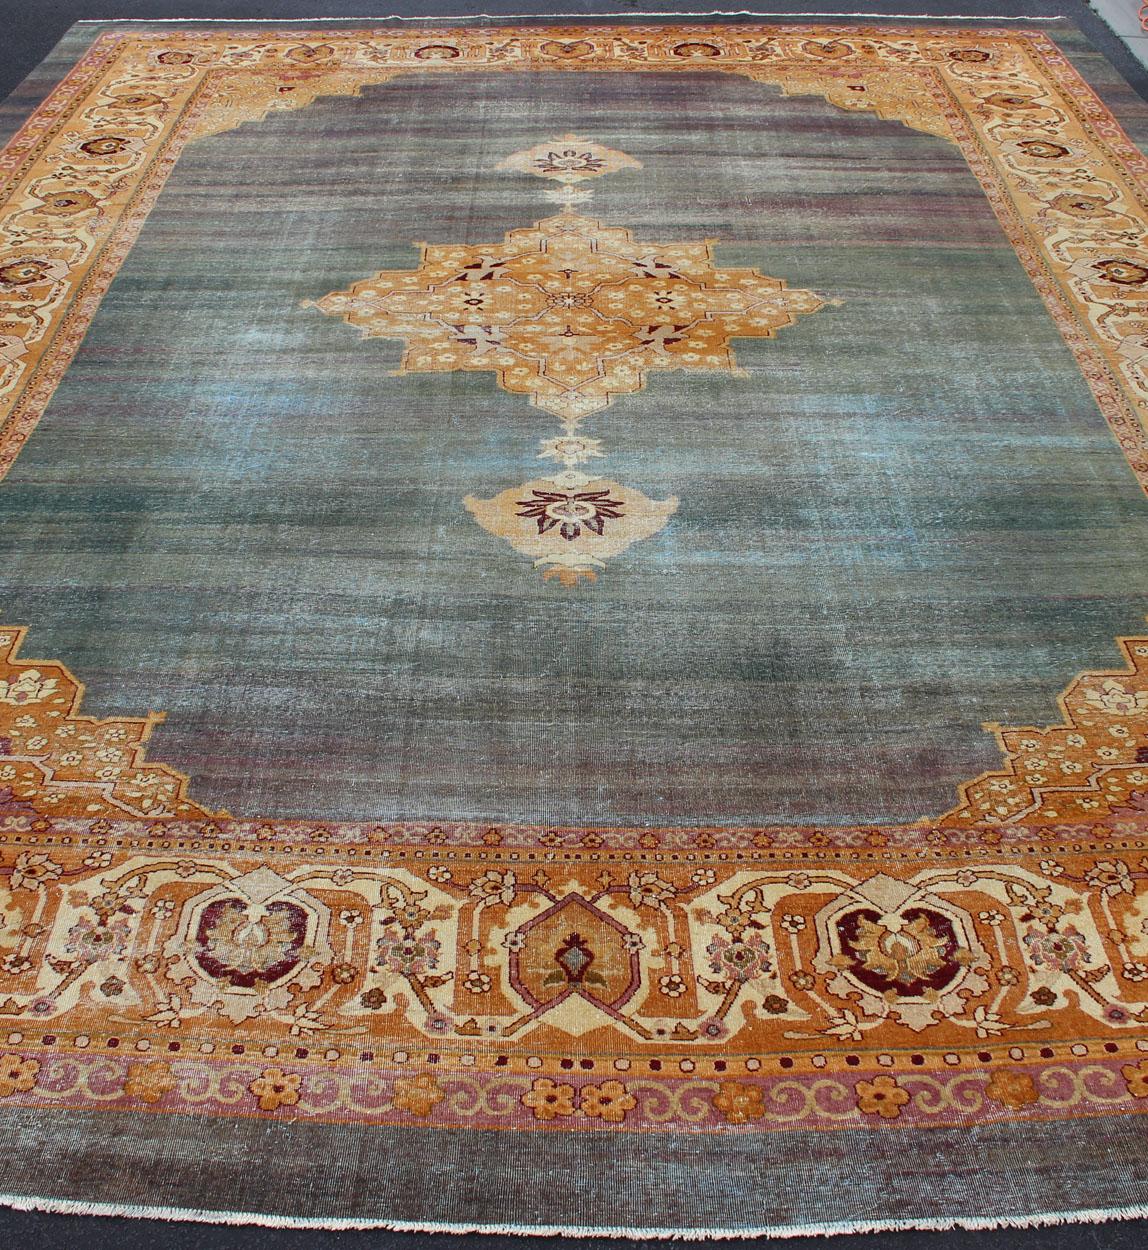 19th Century Antique Indian Agra Rug Intoxicating Blue Field and Crown Jewel Medallion For Sale